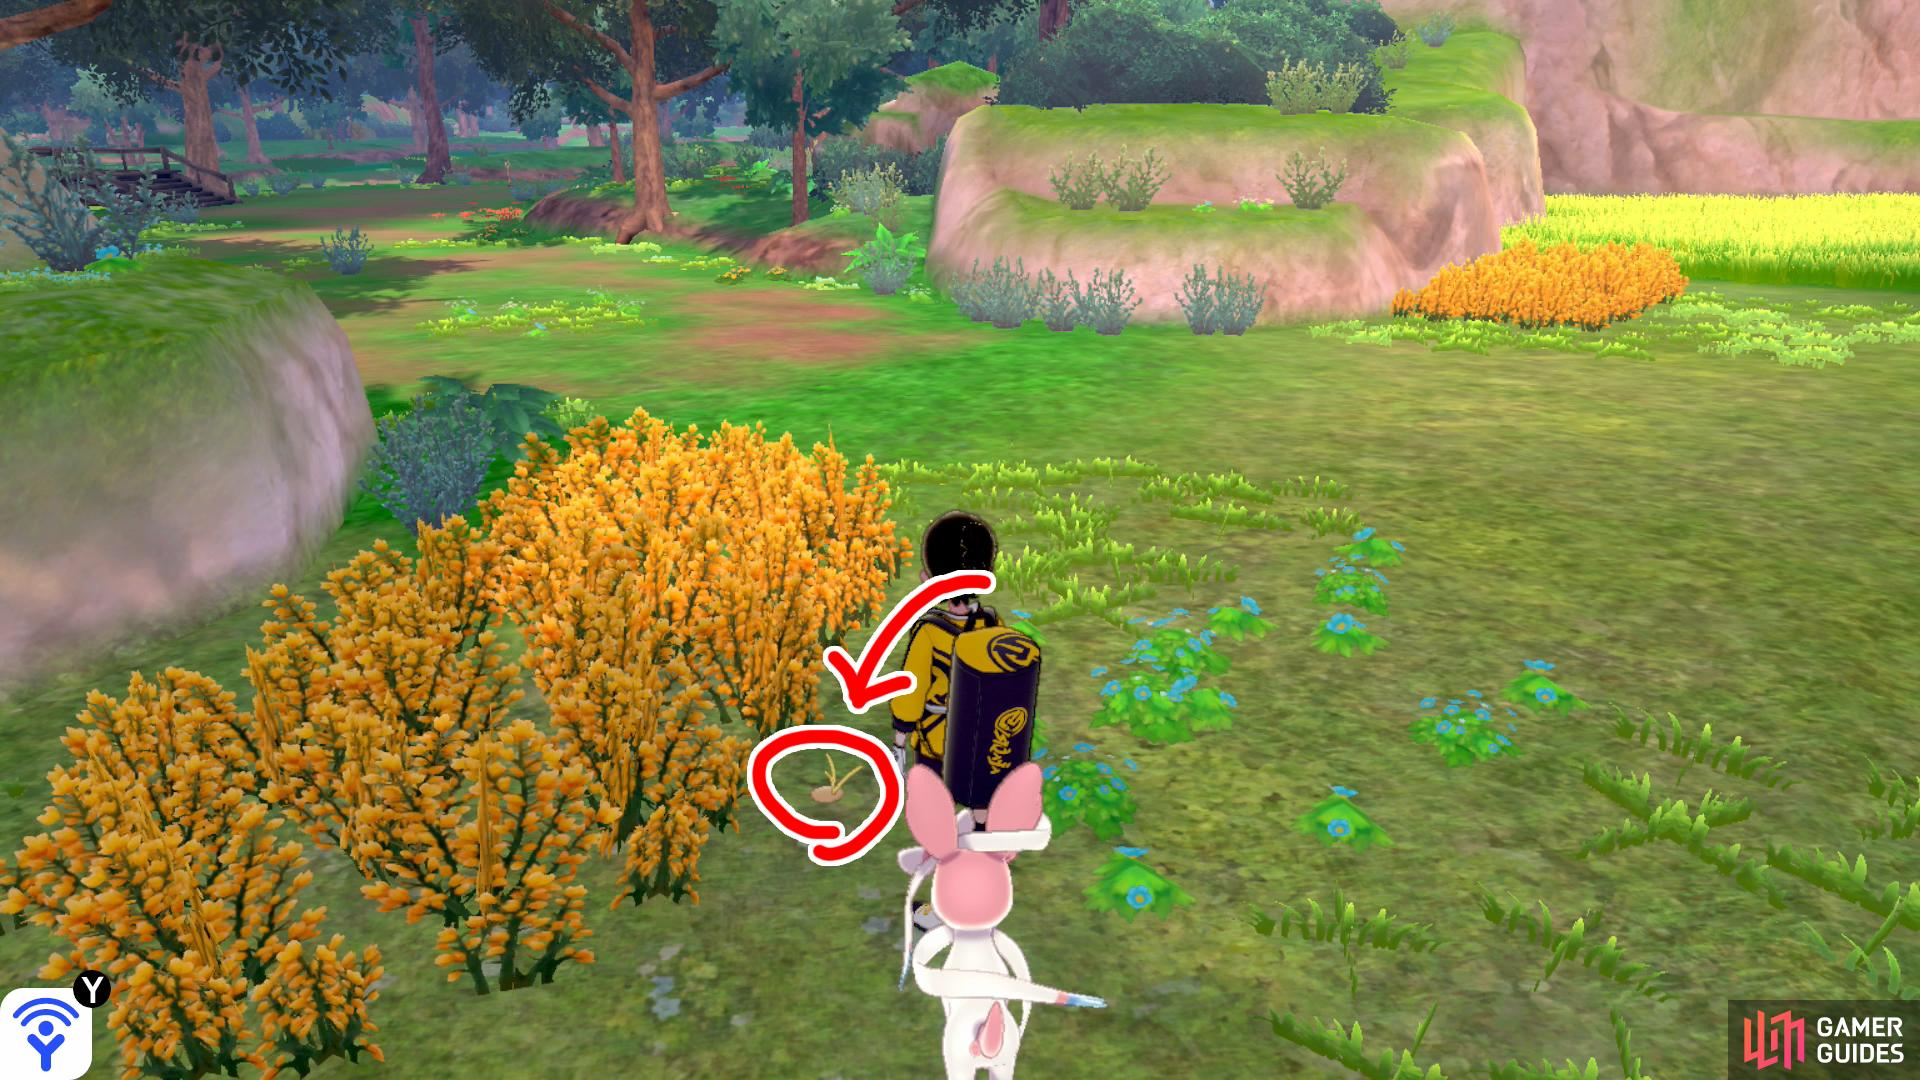 16/20: From Diglett 15, go towards the tree by the forest entrance. Past the tree, check the right side of the tall yellow grass in front of the forest.